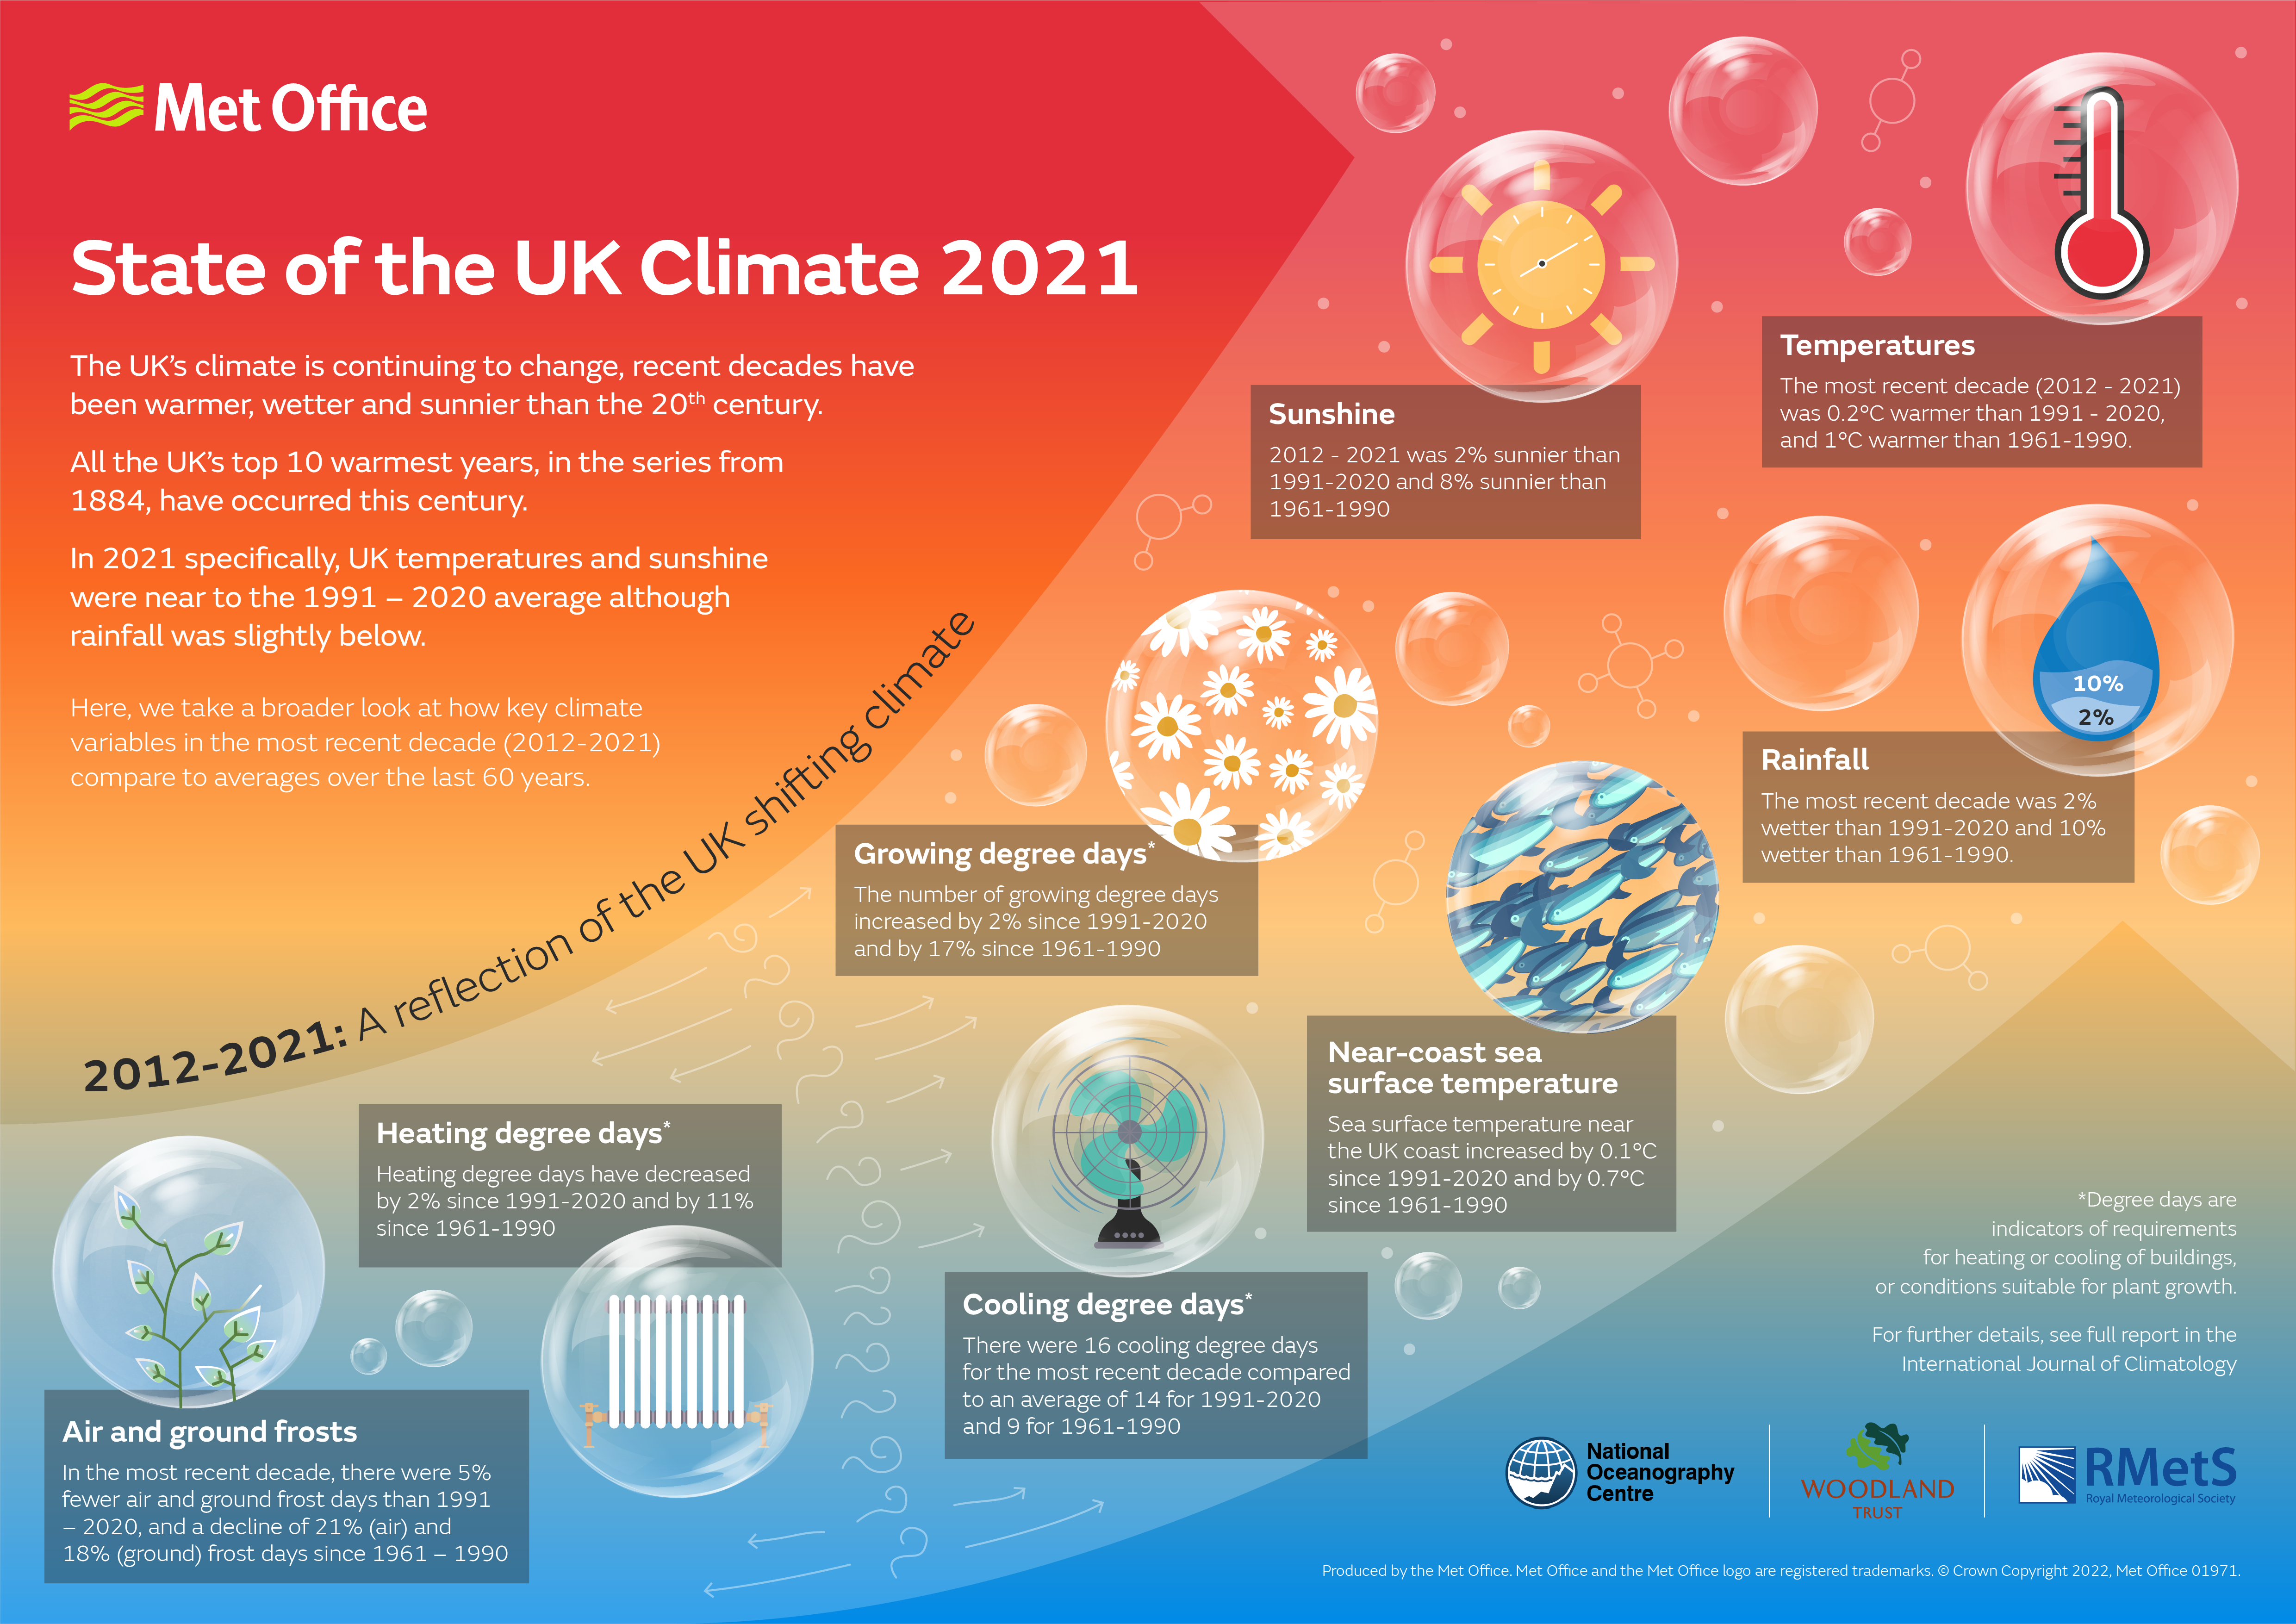 State of the UK Climate 2021 infographic